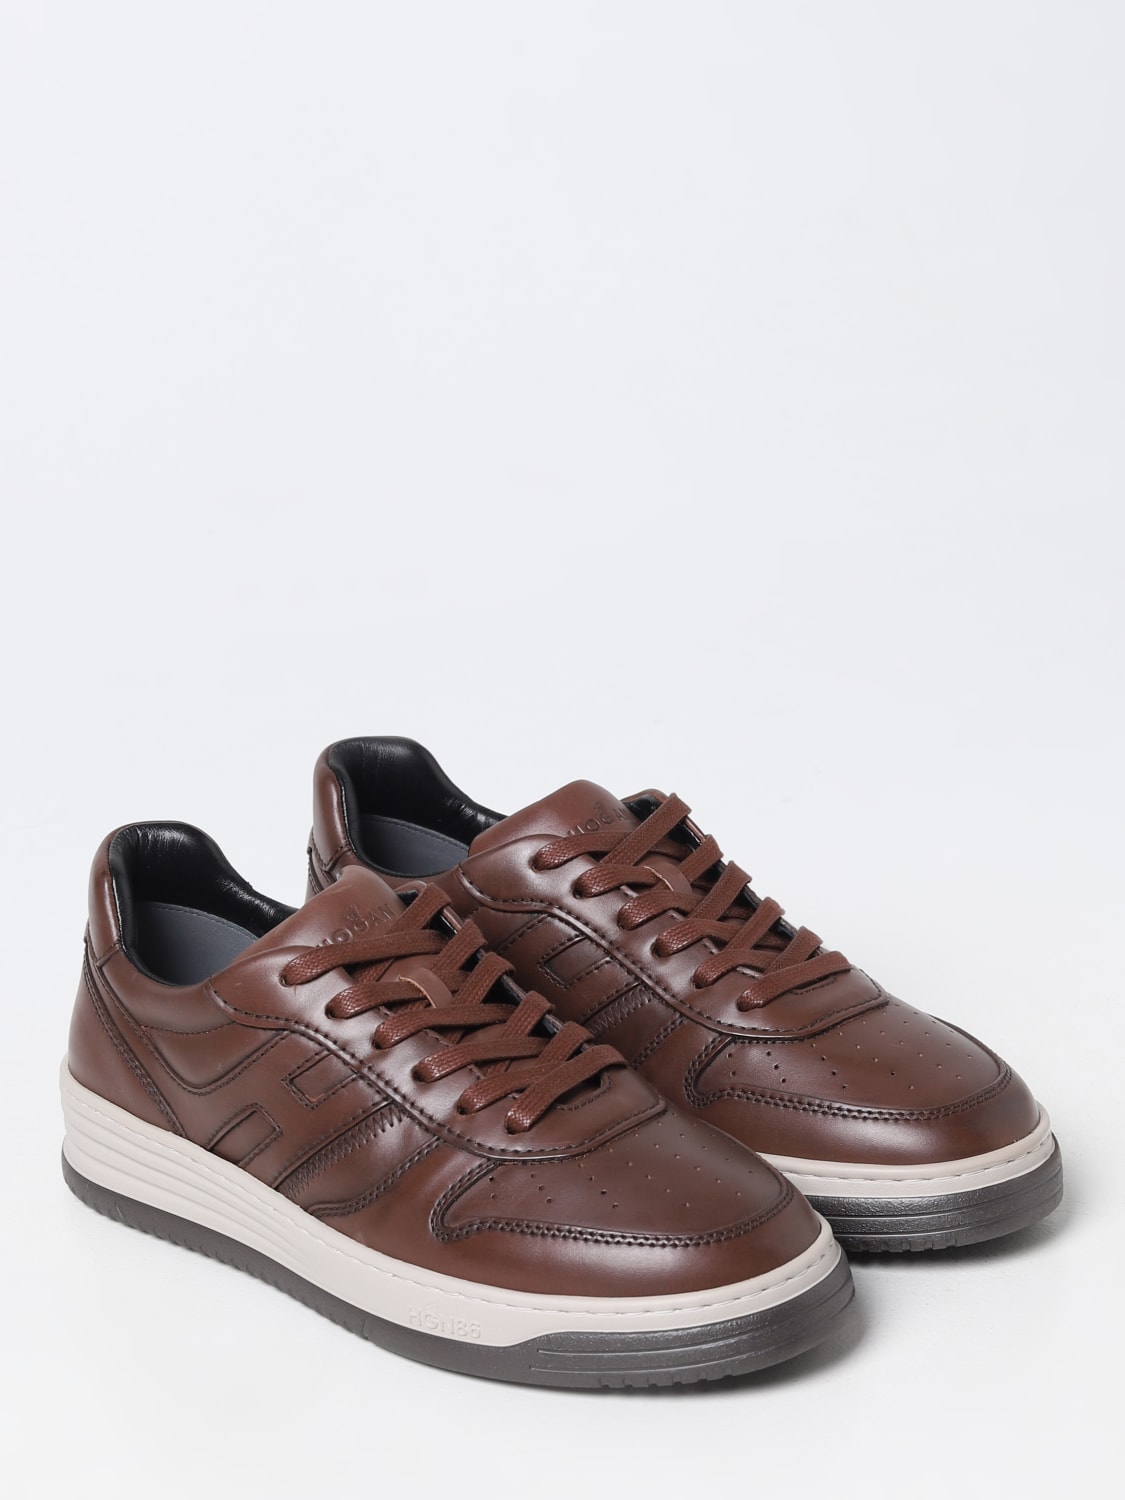 HOGAN - H630 Leather Sneakers